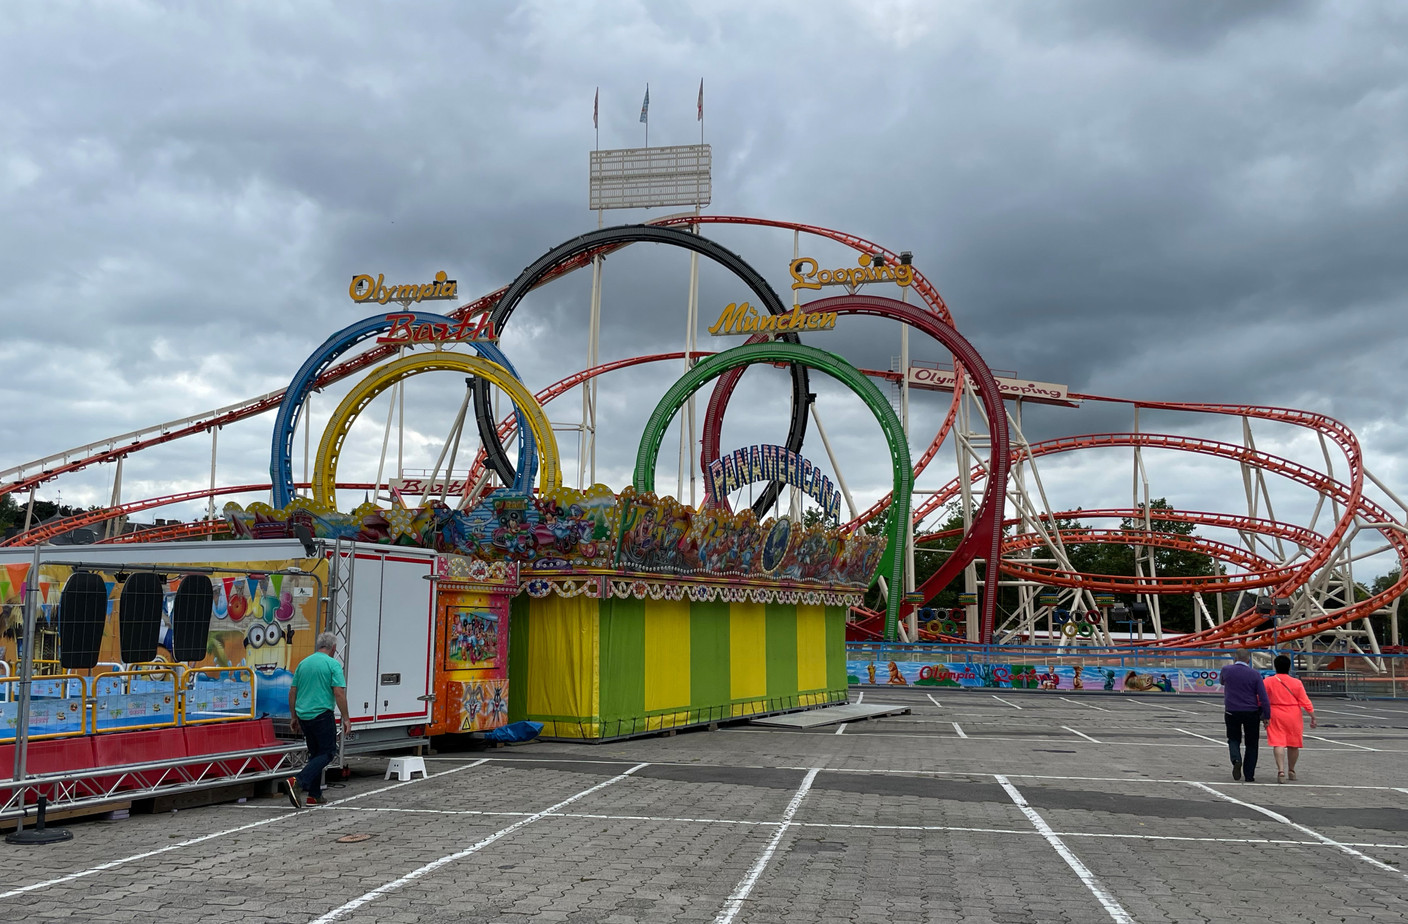 Les cinq loopings de l’attraction Olympia Looping. (Photo: Maxime Toussaint/Maison Moderne)